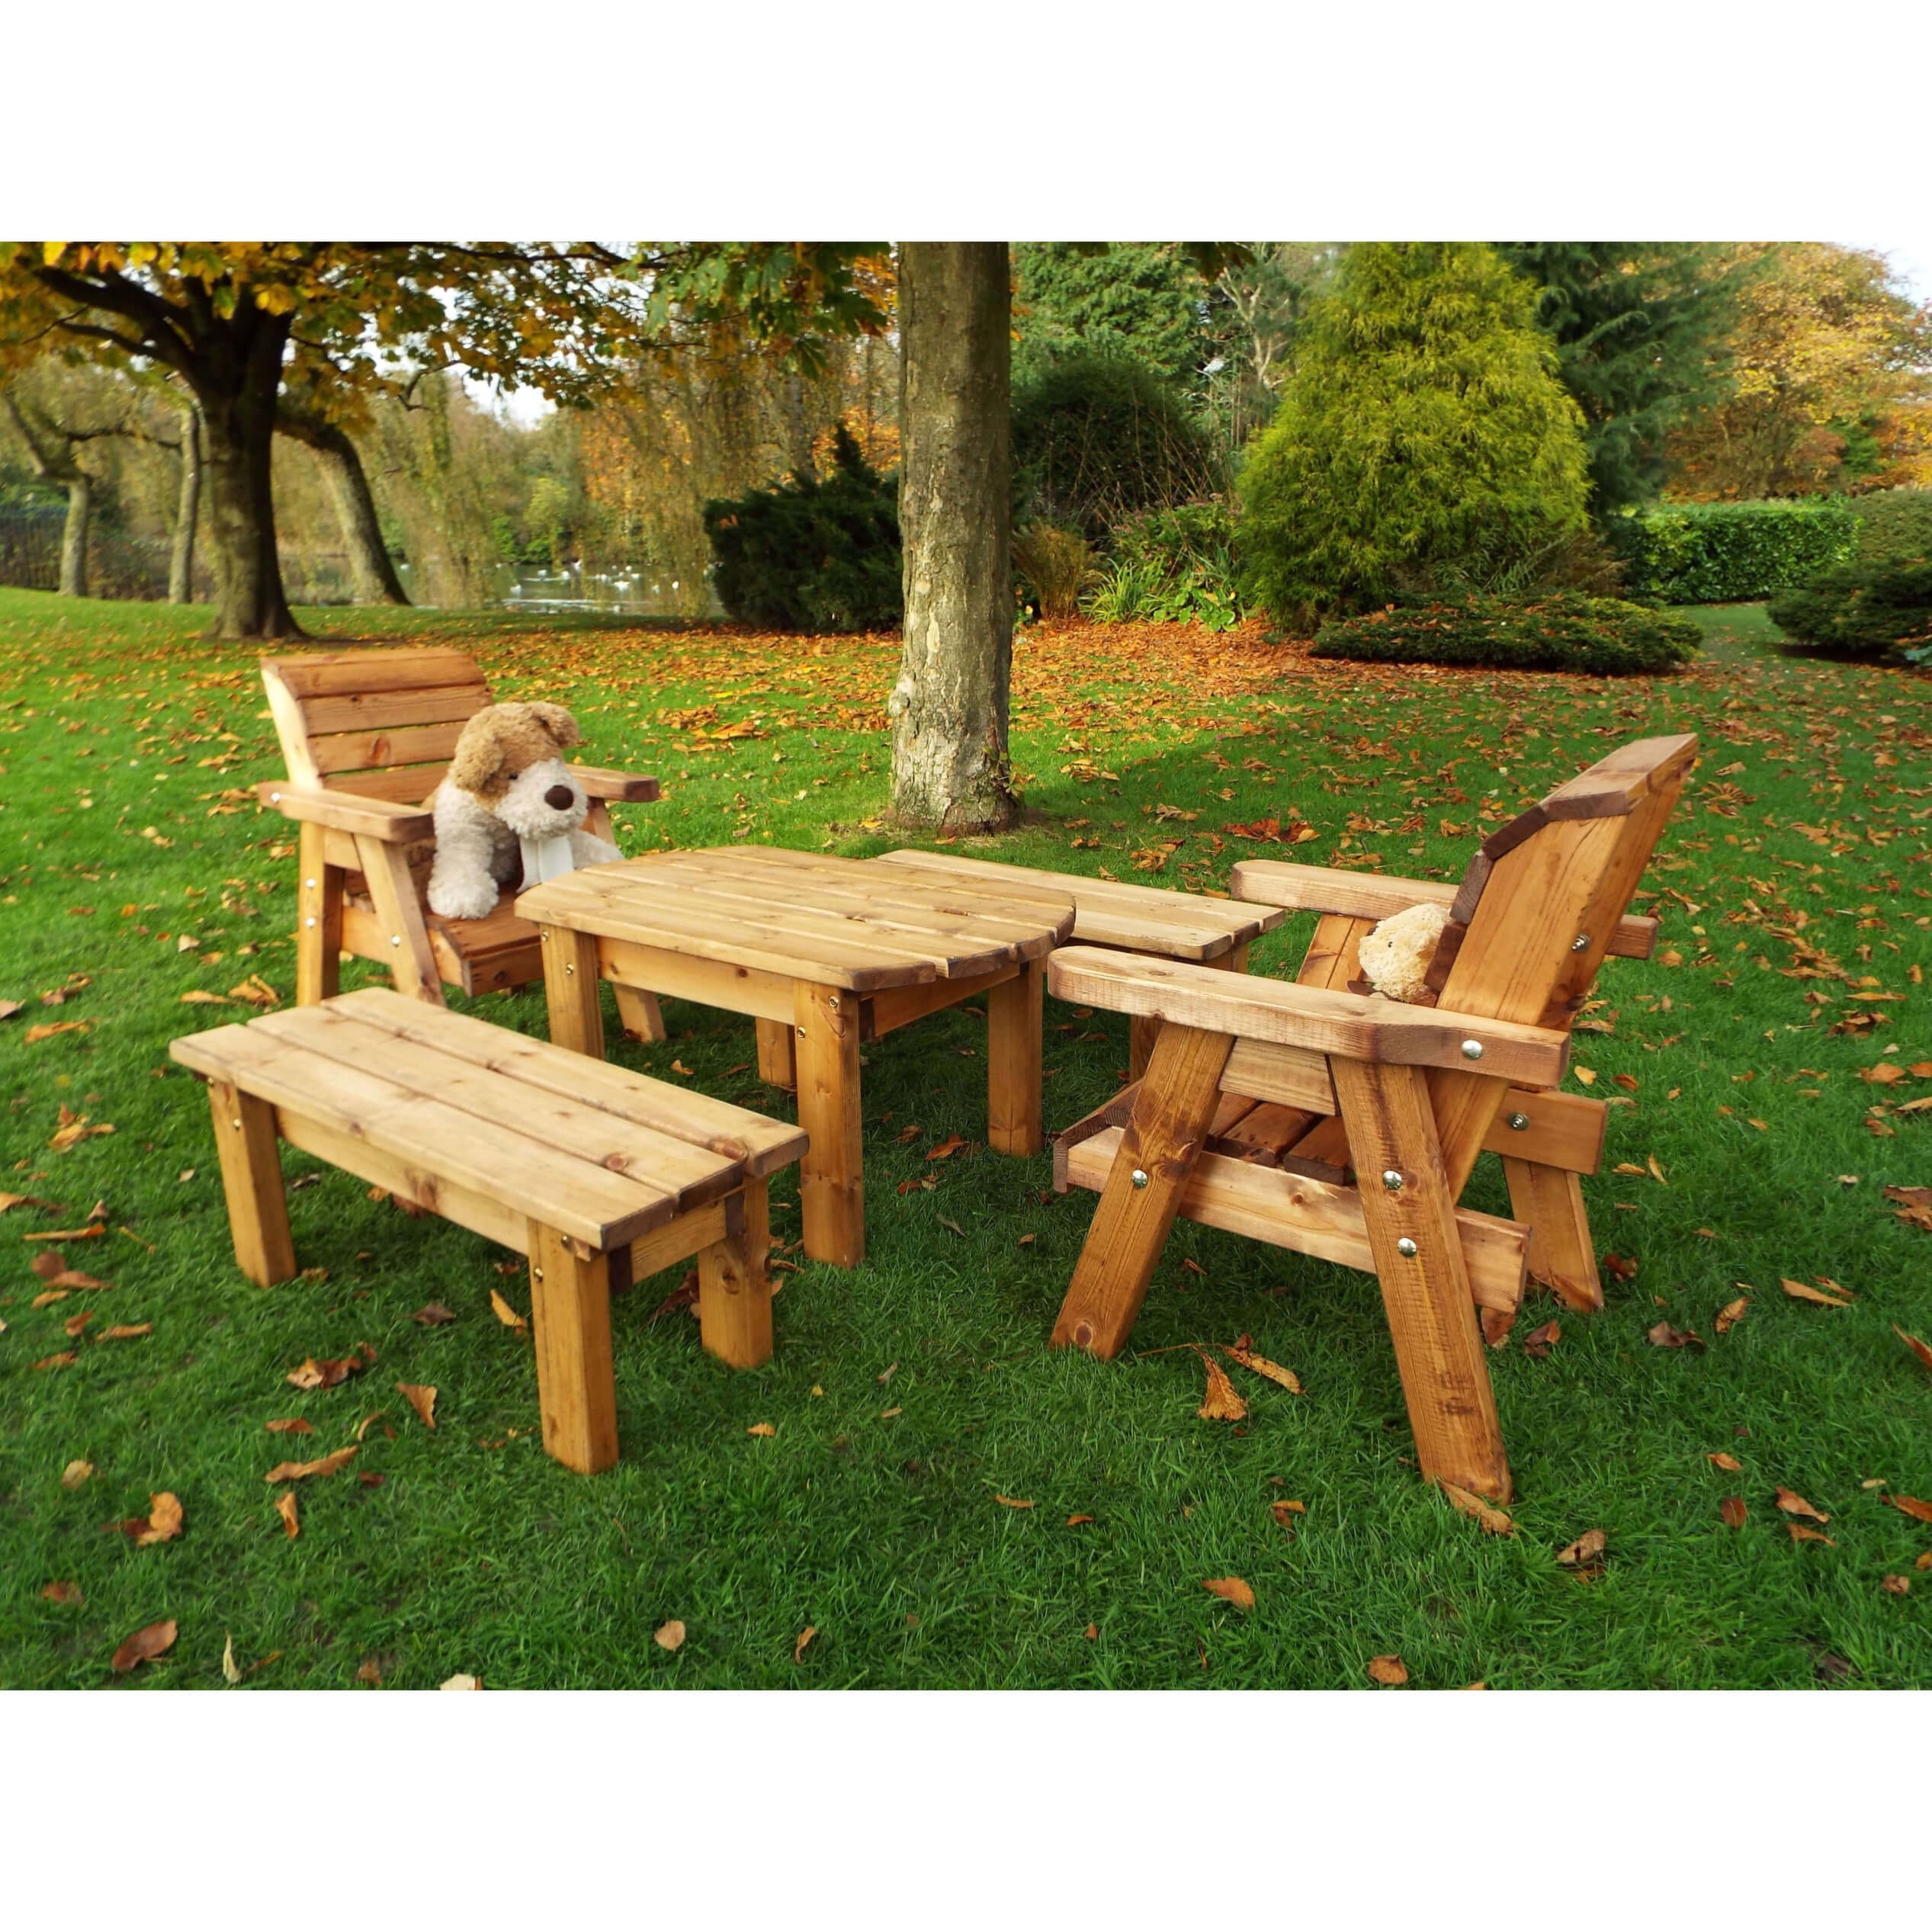 Childrens 6 seater wooden outdoor bench and chairs set 1